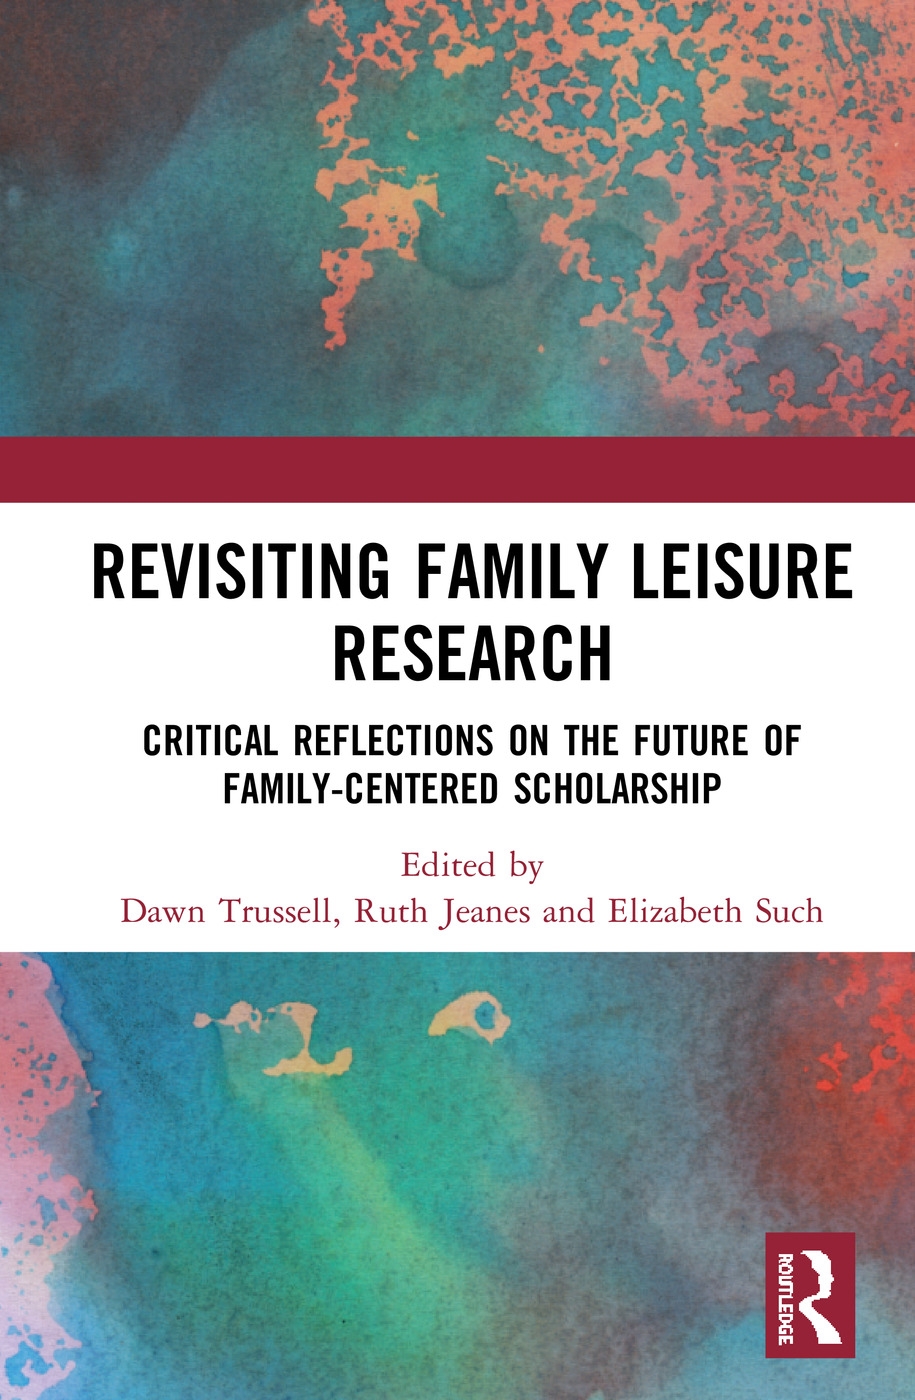 Revisiting Family Leisure Research: Critical Reflections on the Future of Family-Centered Scholarship